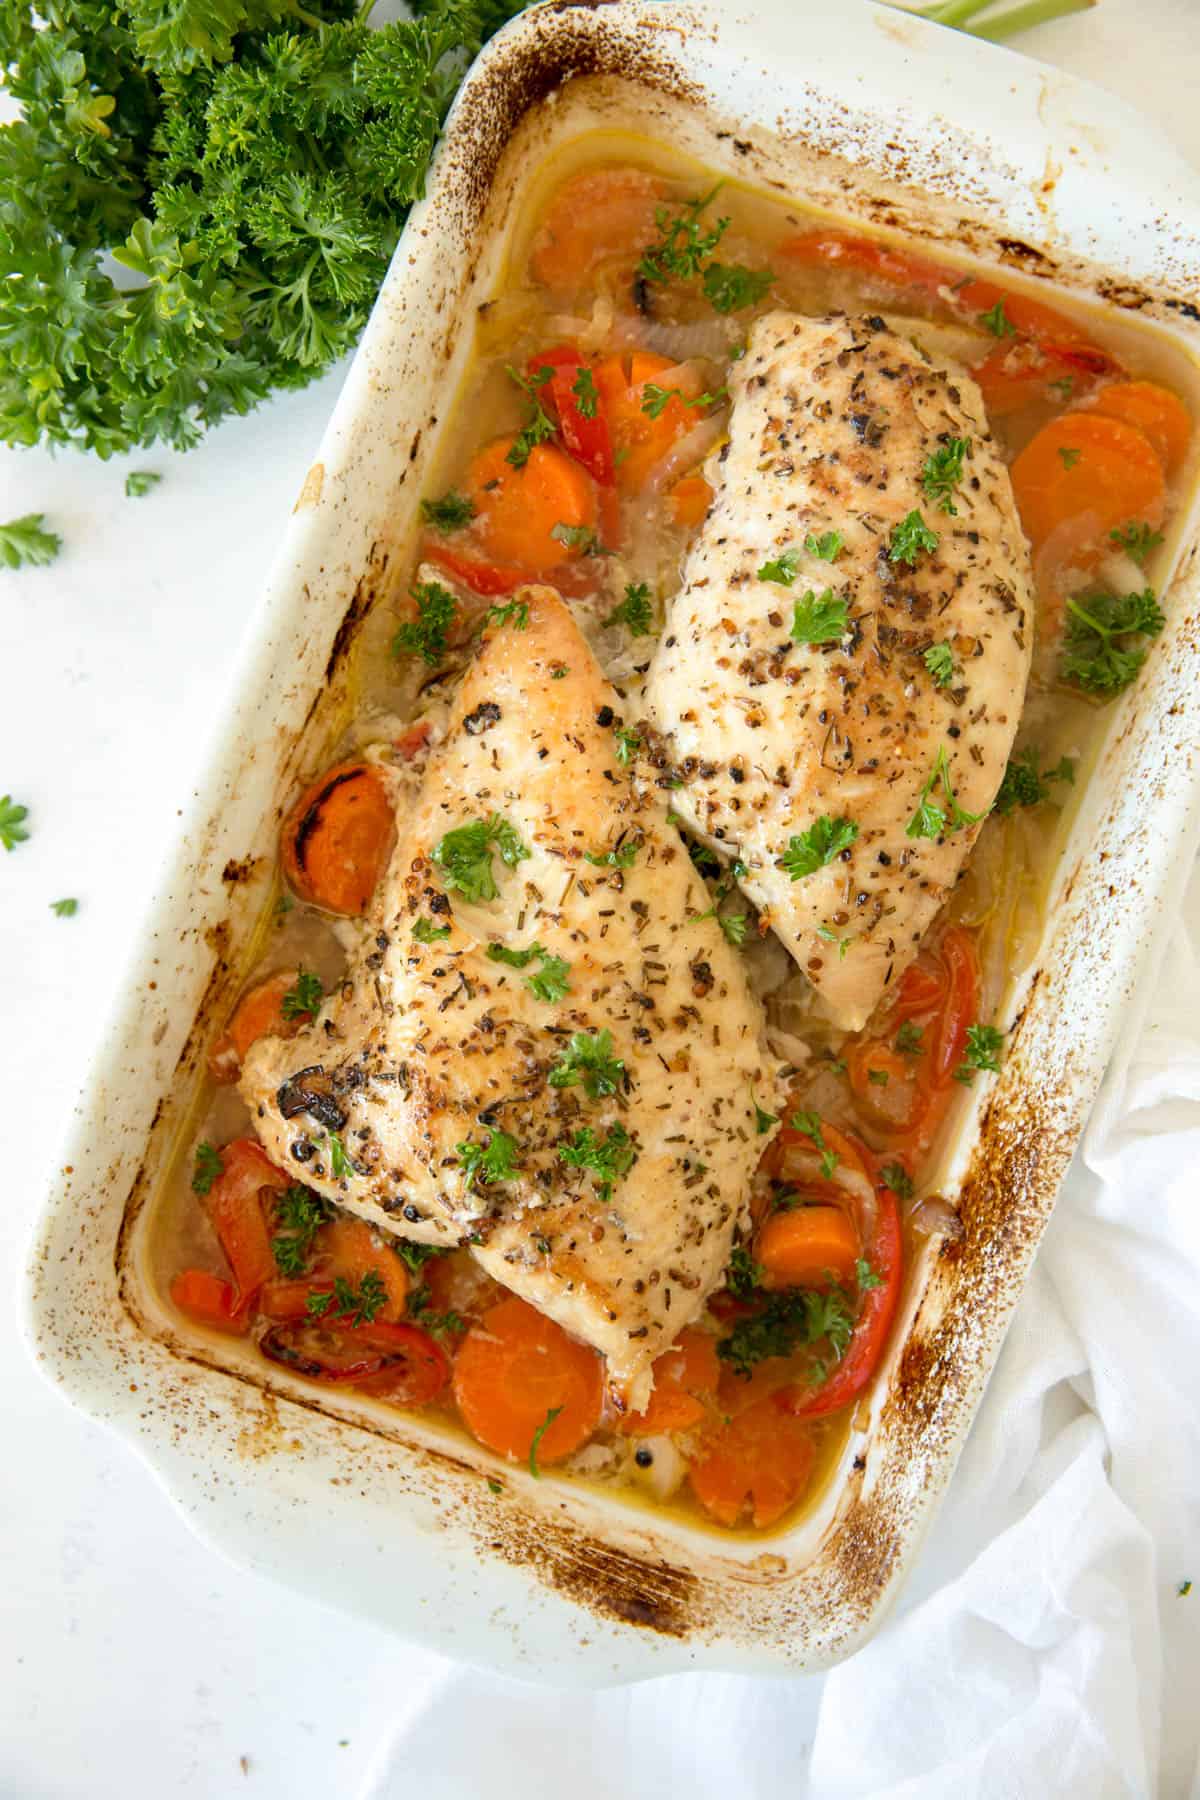 A turkey tenderloin baked in a casserole dish with carrots, peppers and onions.